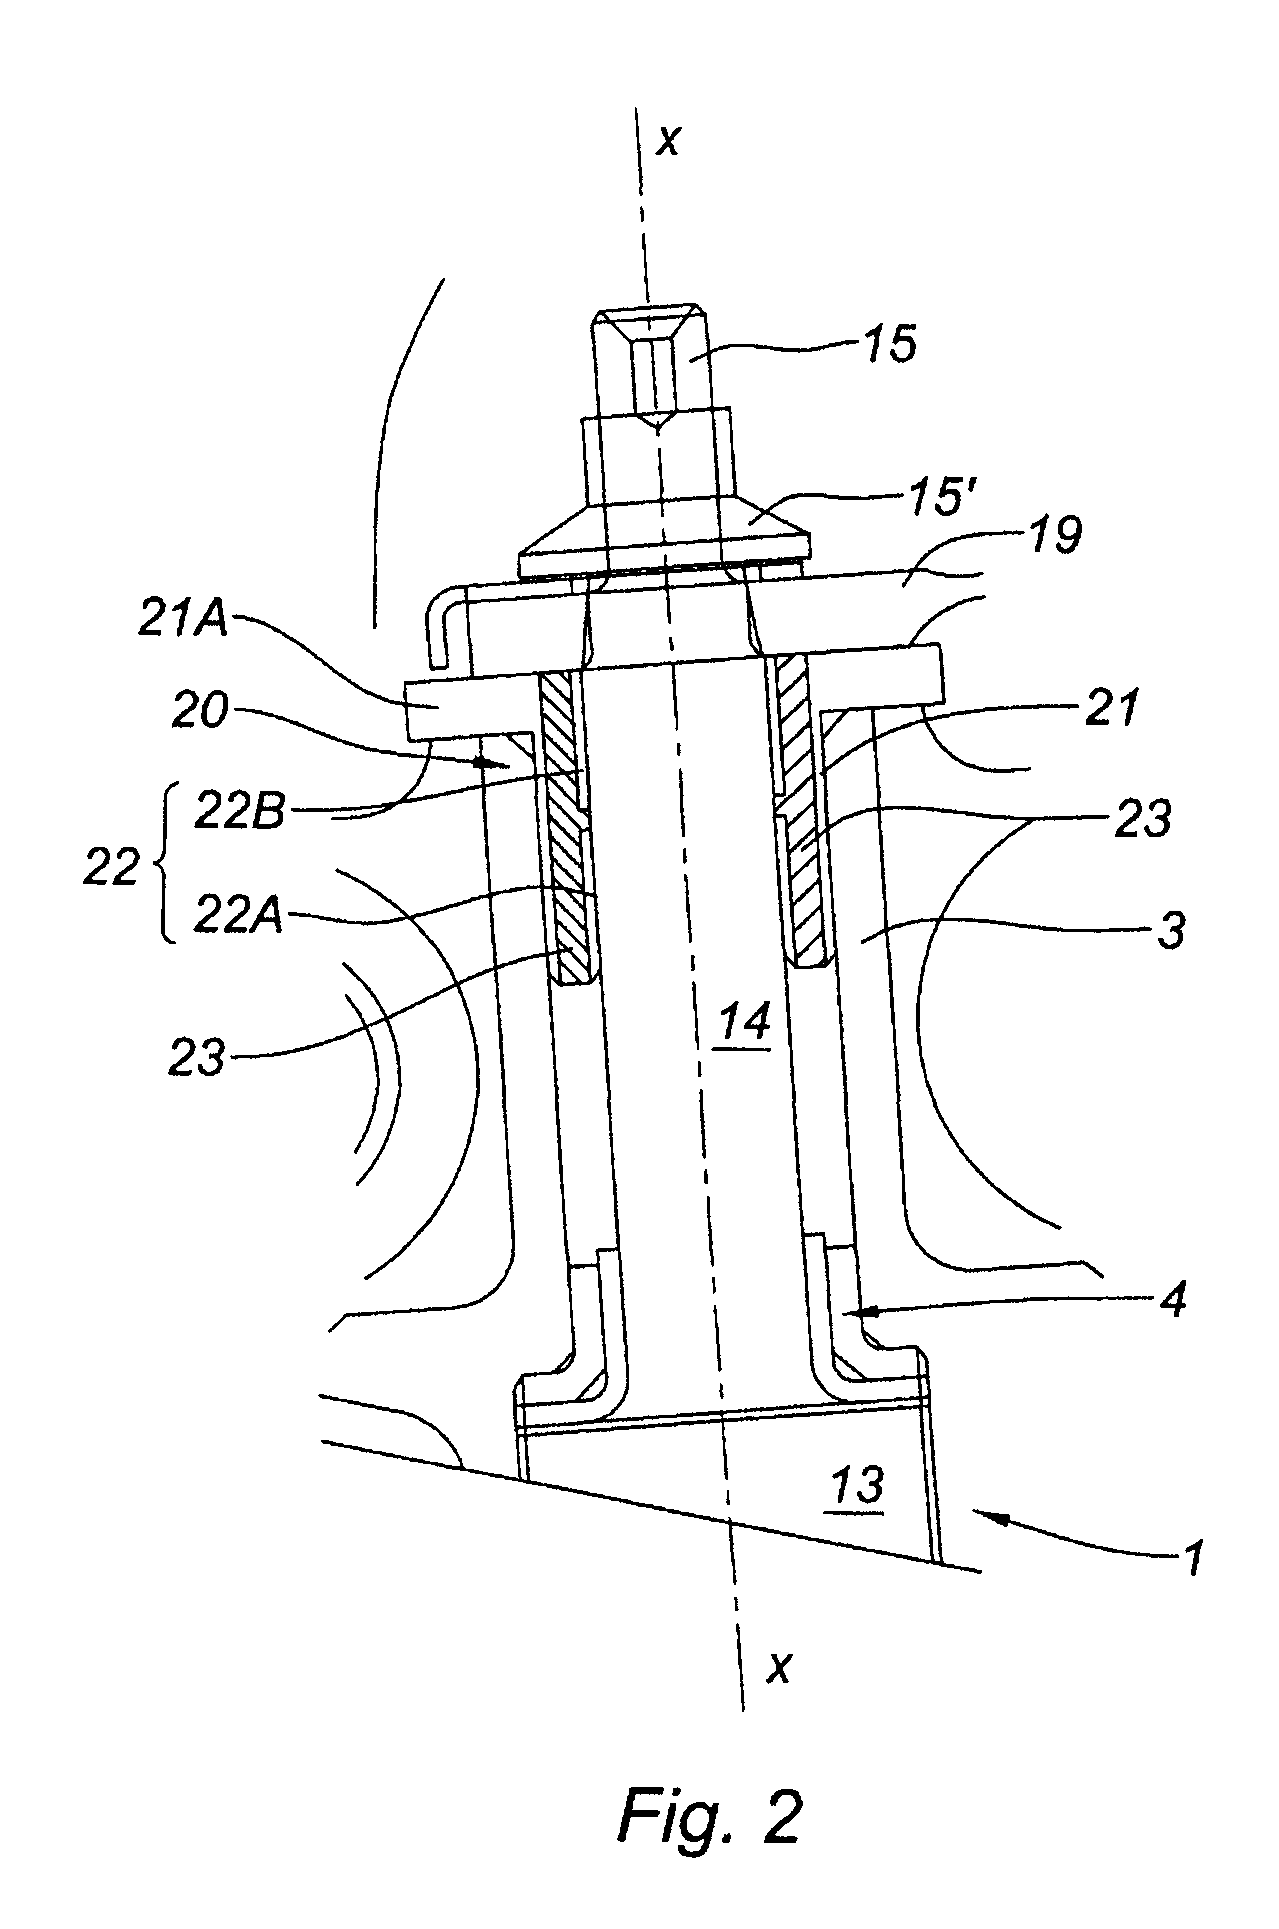 Bearing for variable pitch stator vane